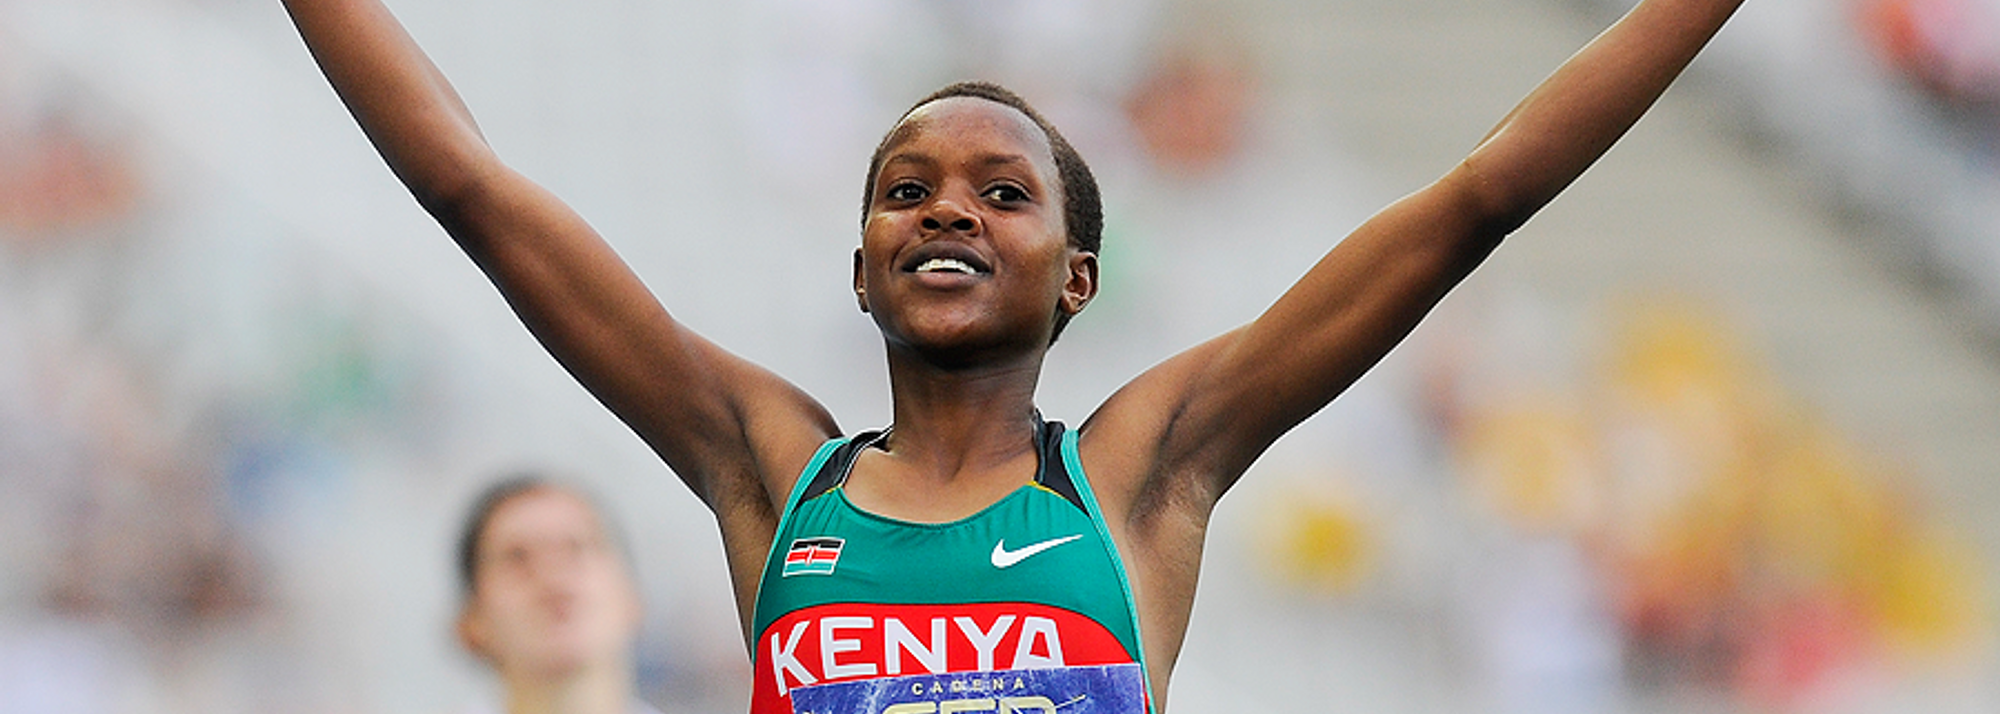 Kenya’s Faith Chepngetich Kipyegon completed in style a brilliant hat trick of international medals as her overwhelming victory today comes after last year’s World Youth 1500m gold medal and the World Cross Country Junior medal also managed on the Spanish soil of Punta Umbría, where she ran barefoot.
